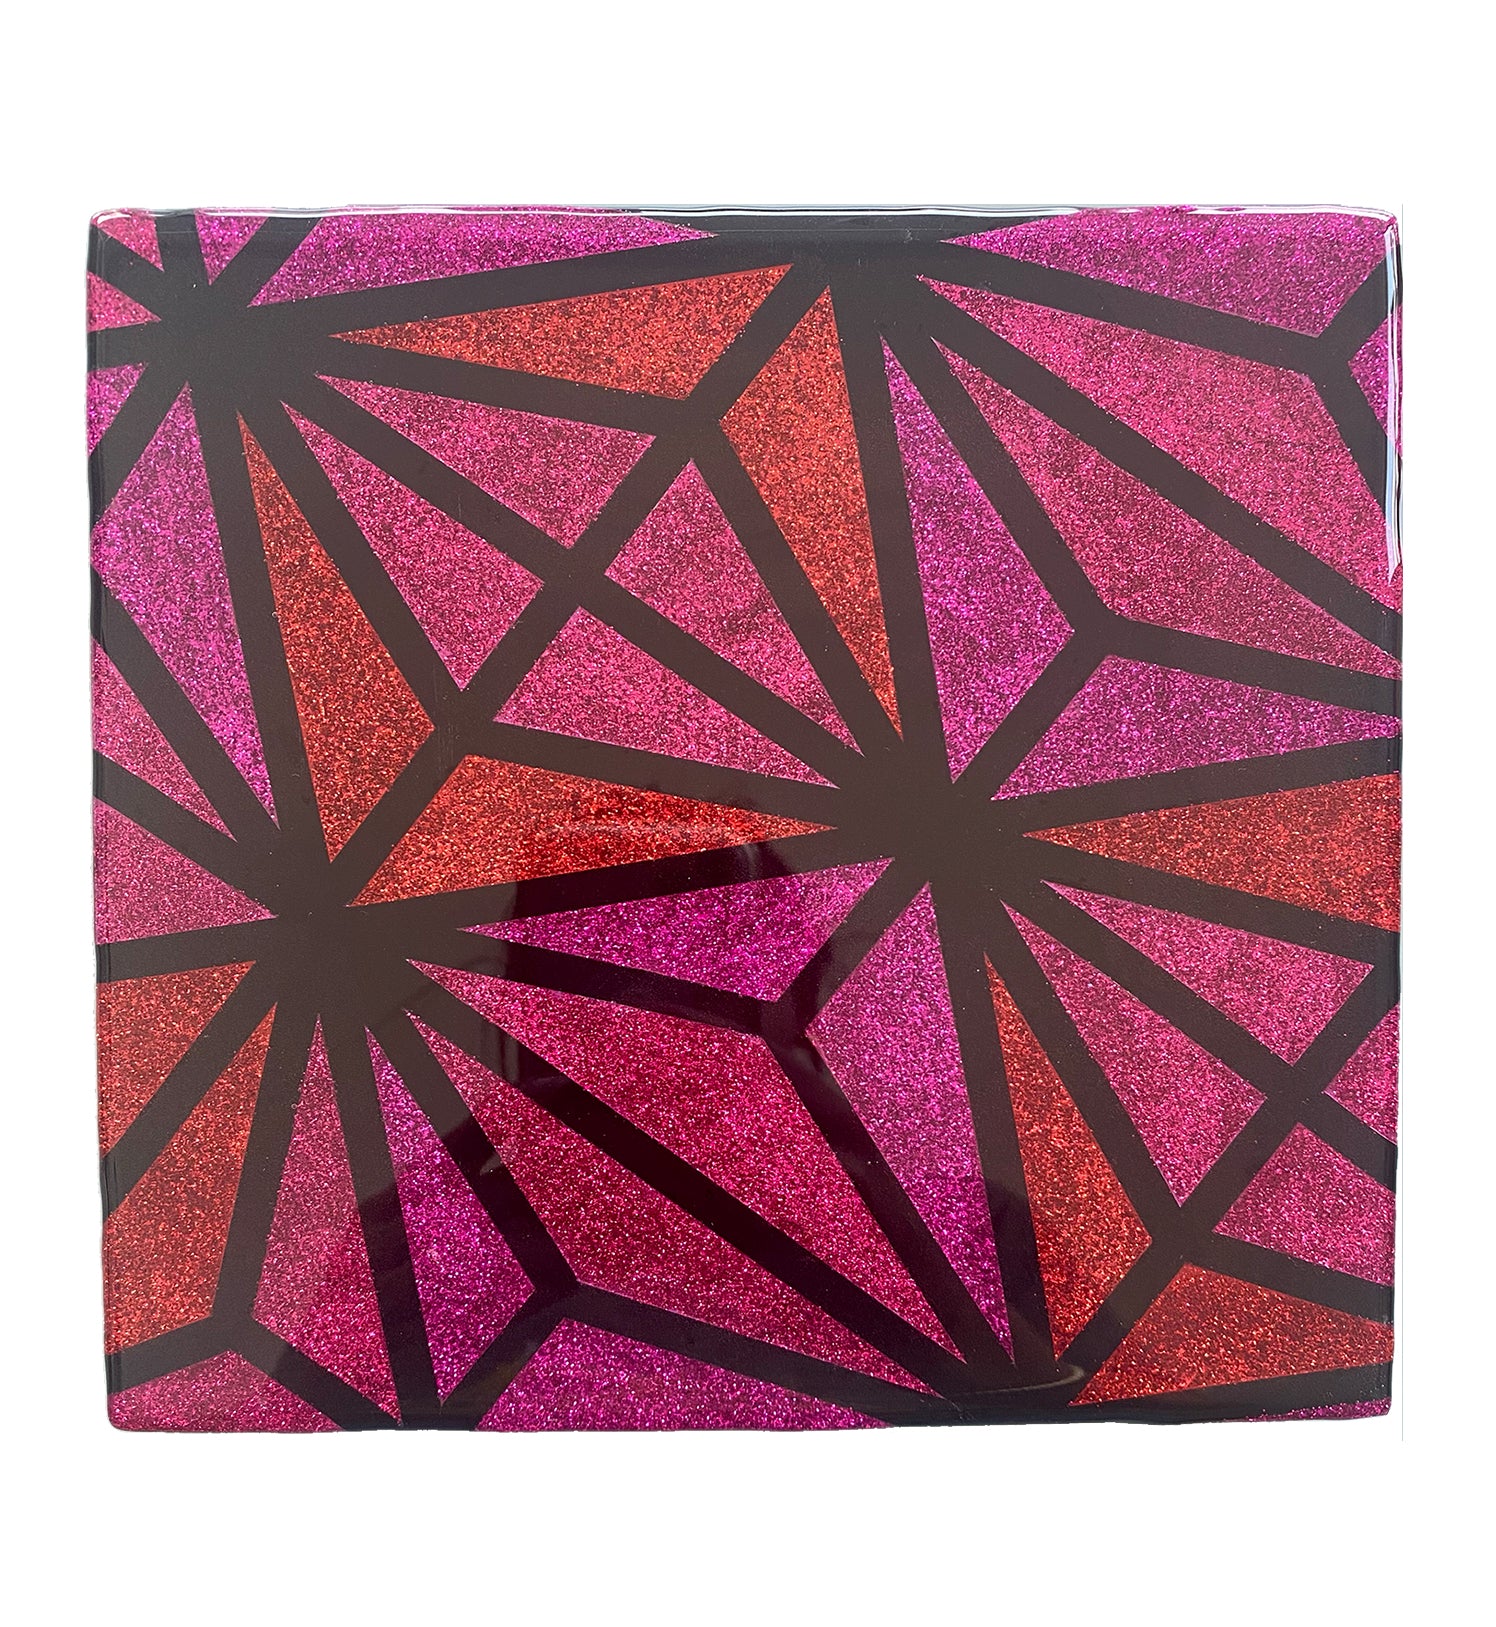 Pink Glitter and Resin Geometric Media Mixed Devils Wall – Art May Triangles Care